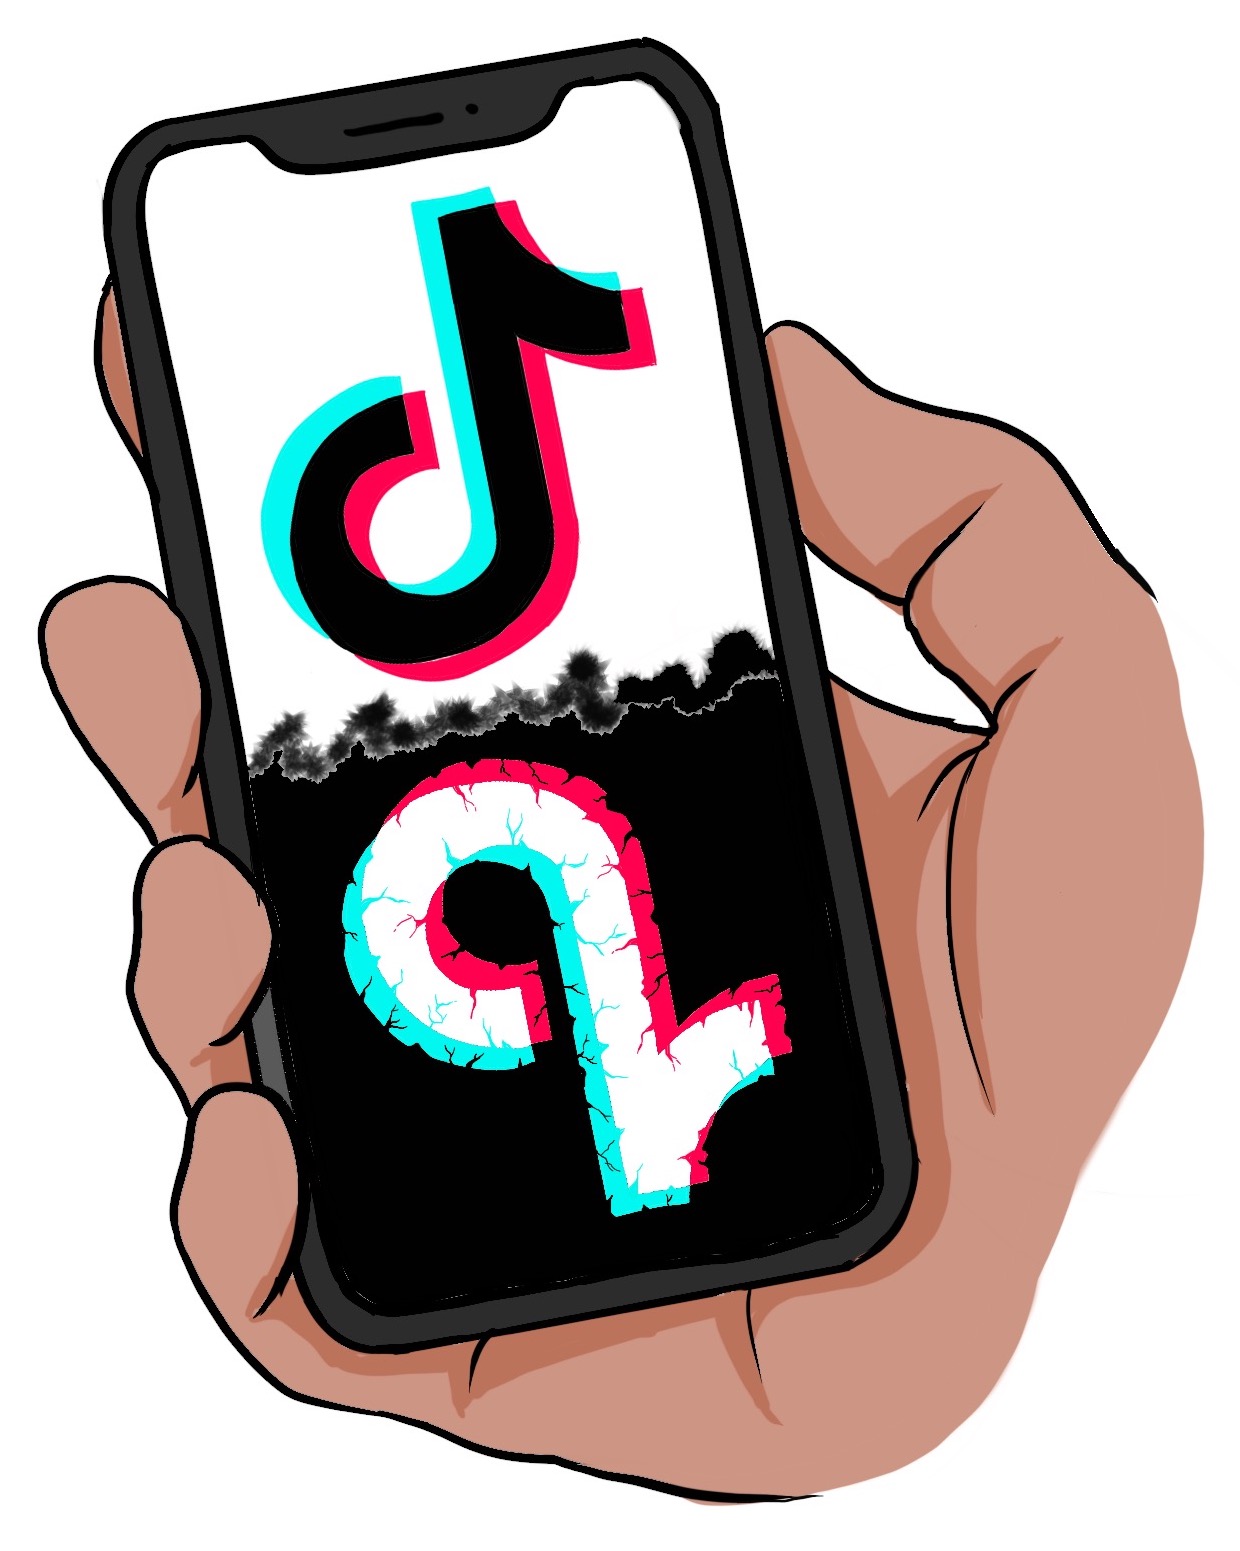 A cell phone screen shows a mirrored TikTok logo, one side bright and normal, the other dark and dilapidated